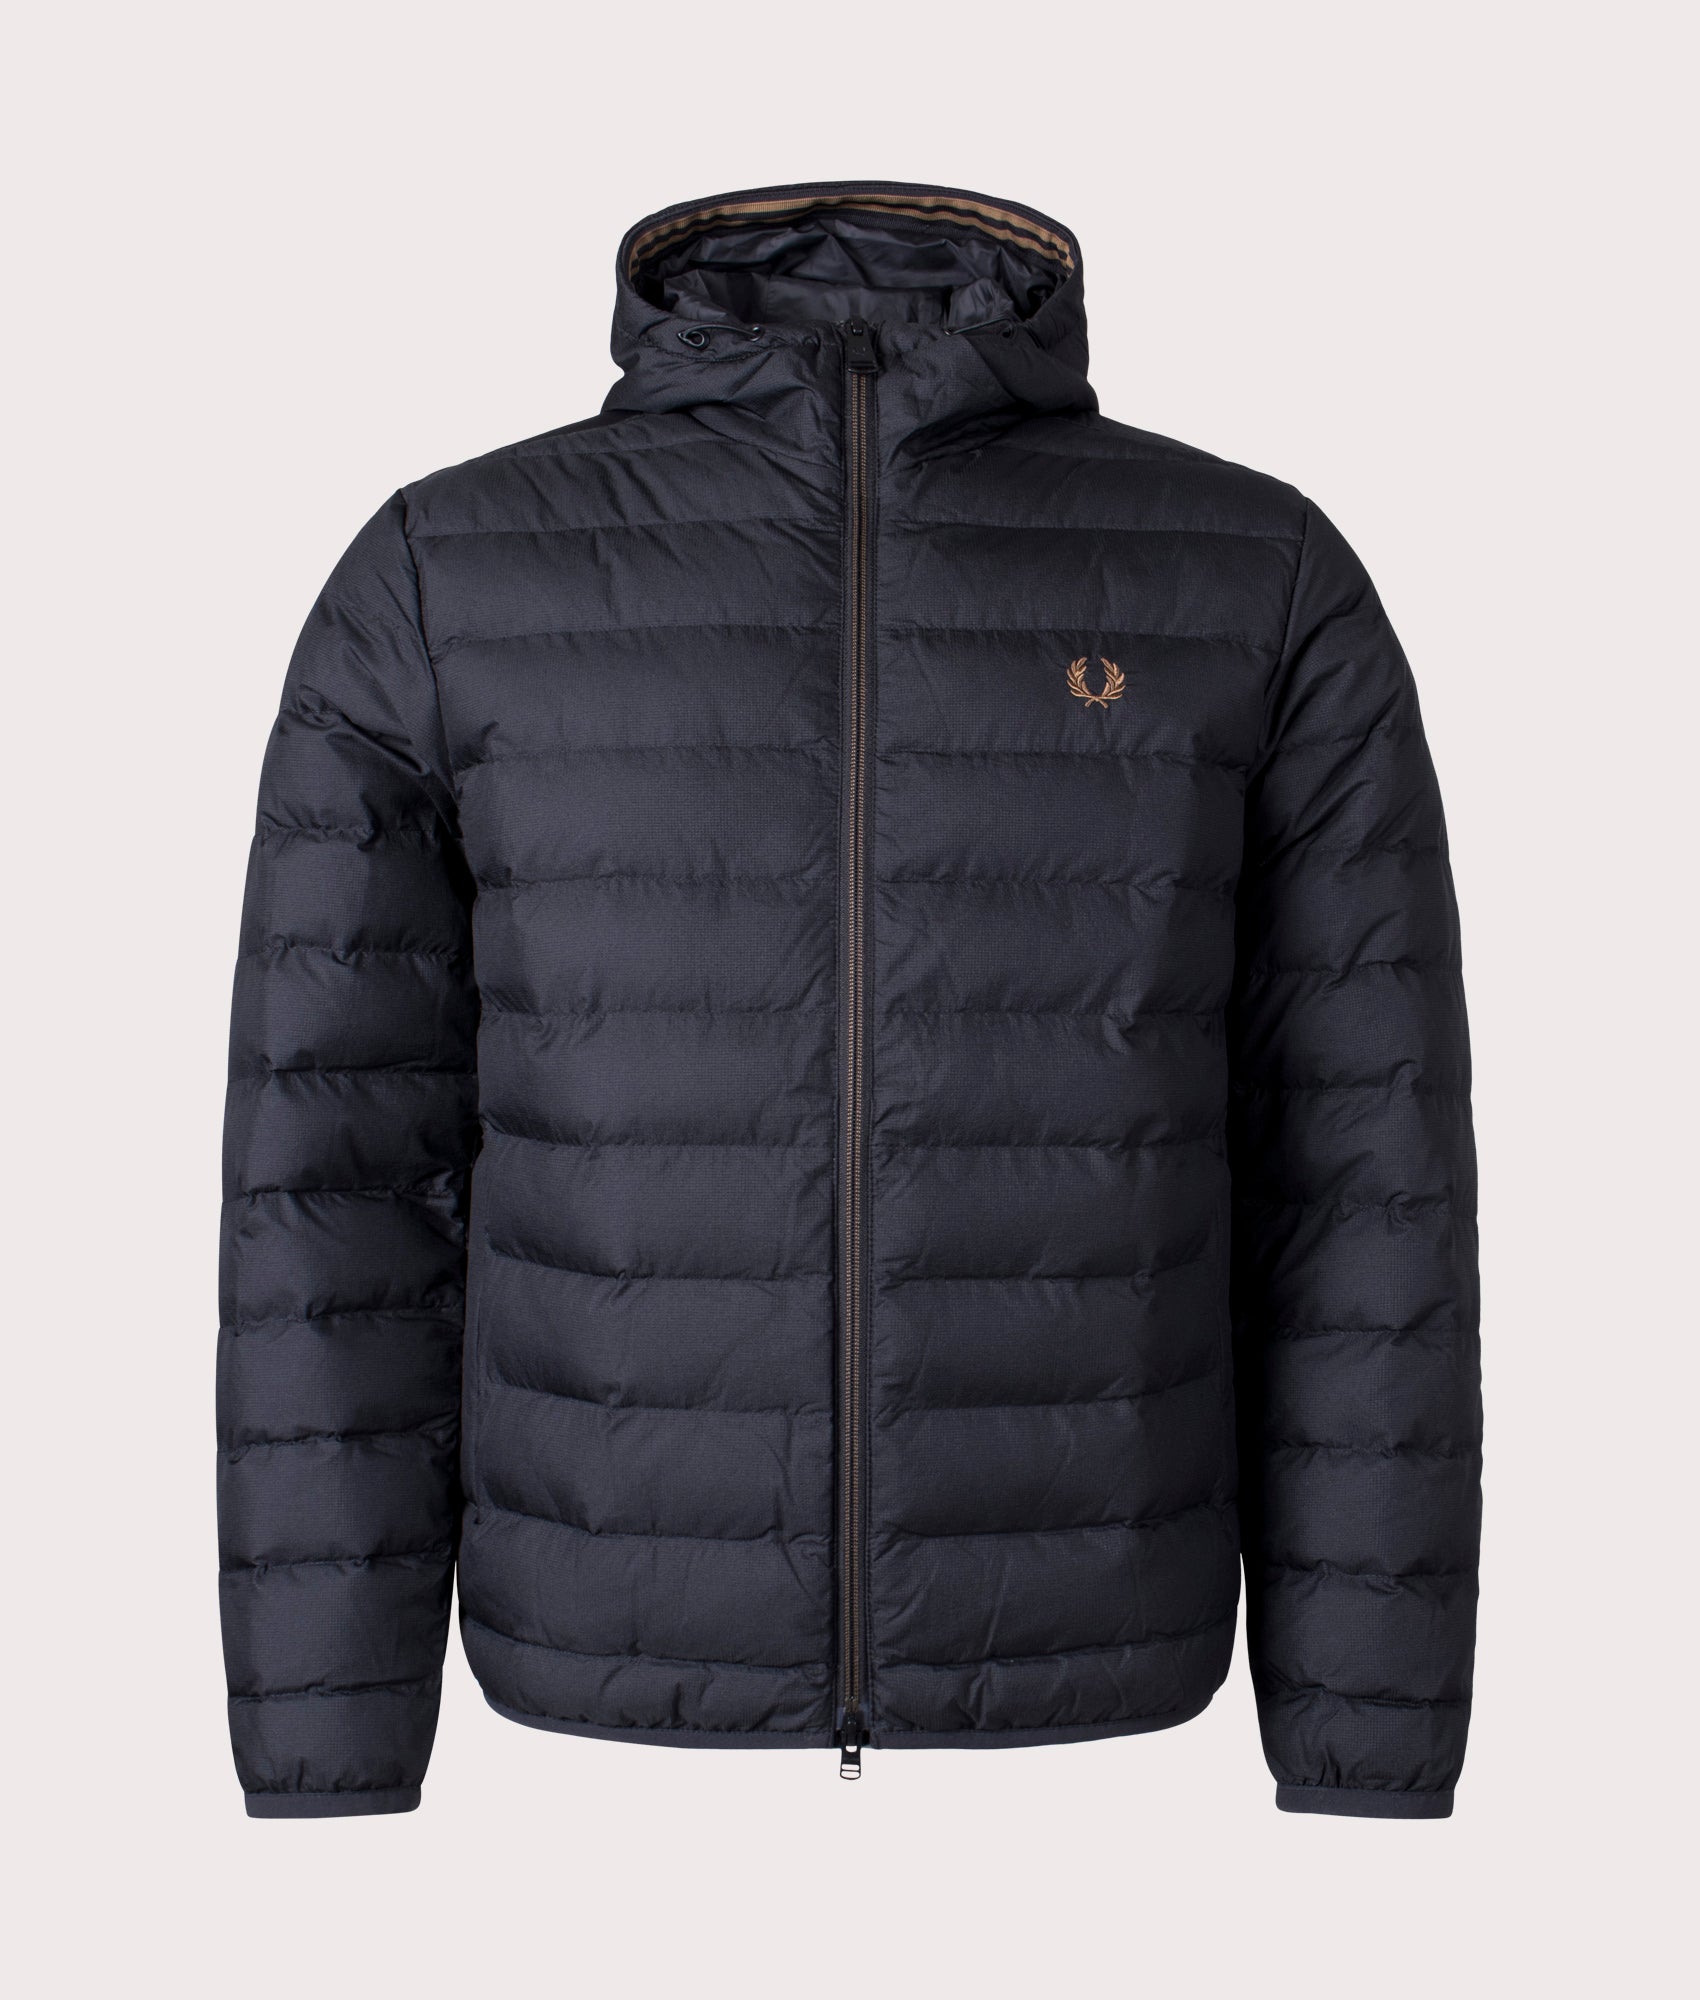 Fred Perry Mens Hooded Insulated Jacket - Colour: 198 Black - Size: XL